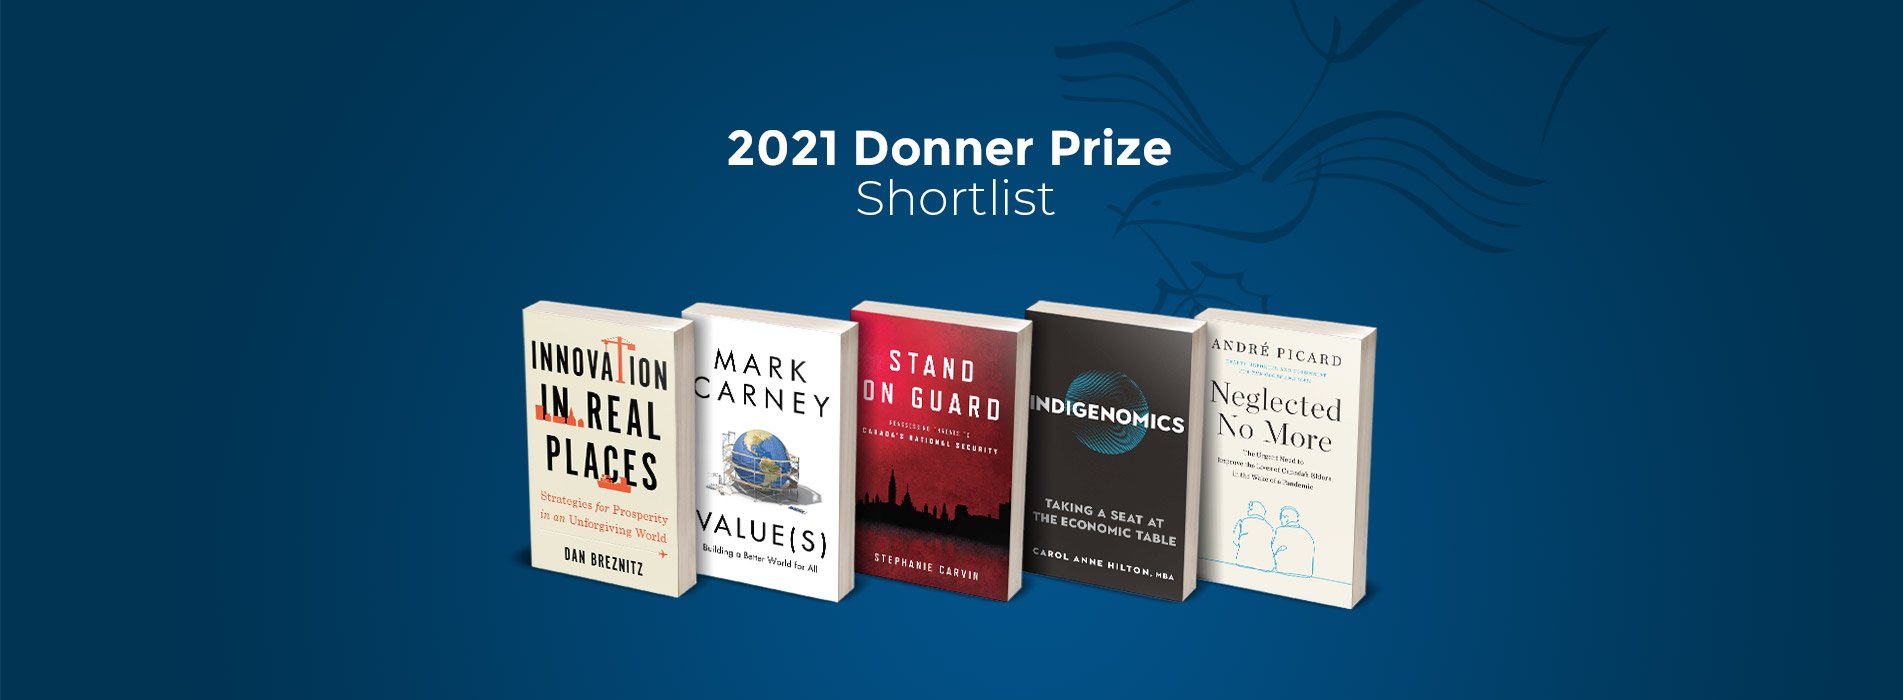 The five books shortlisted for the 2021 Donner Prize